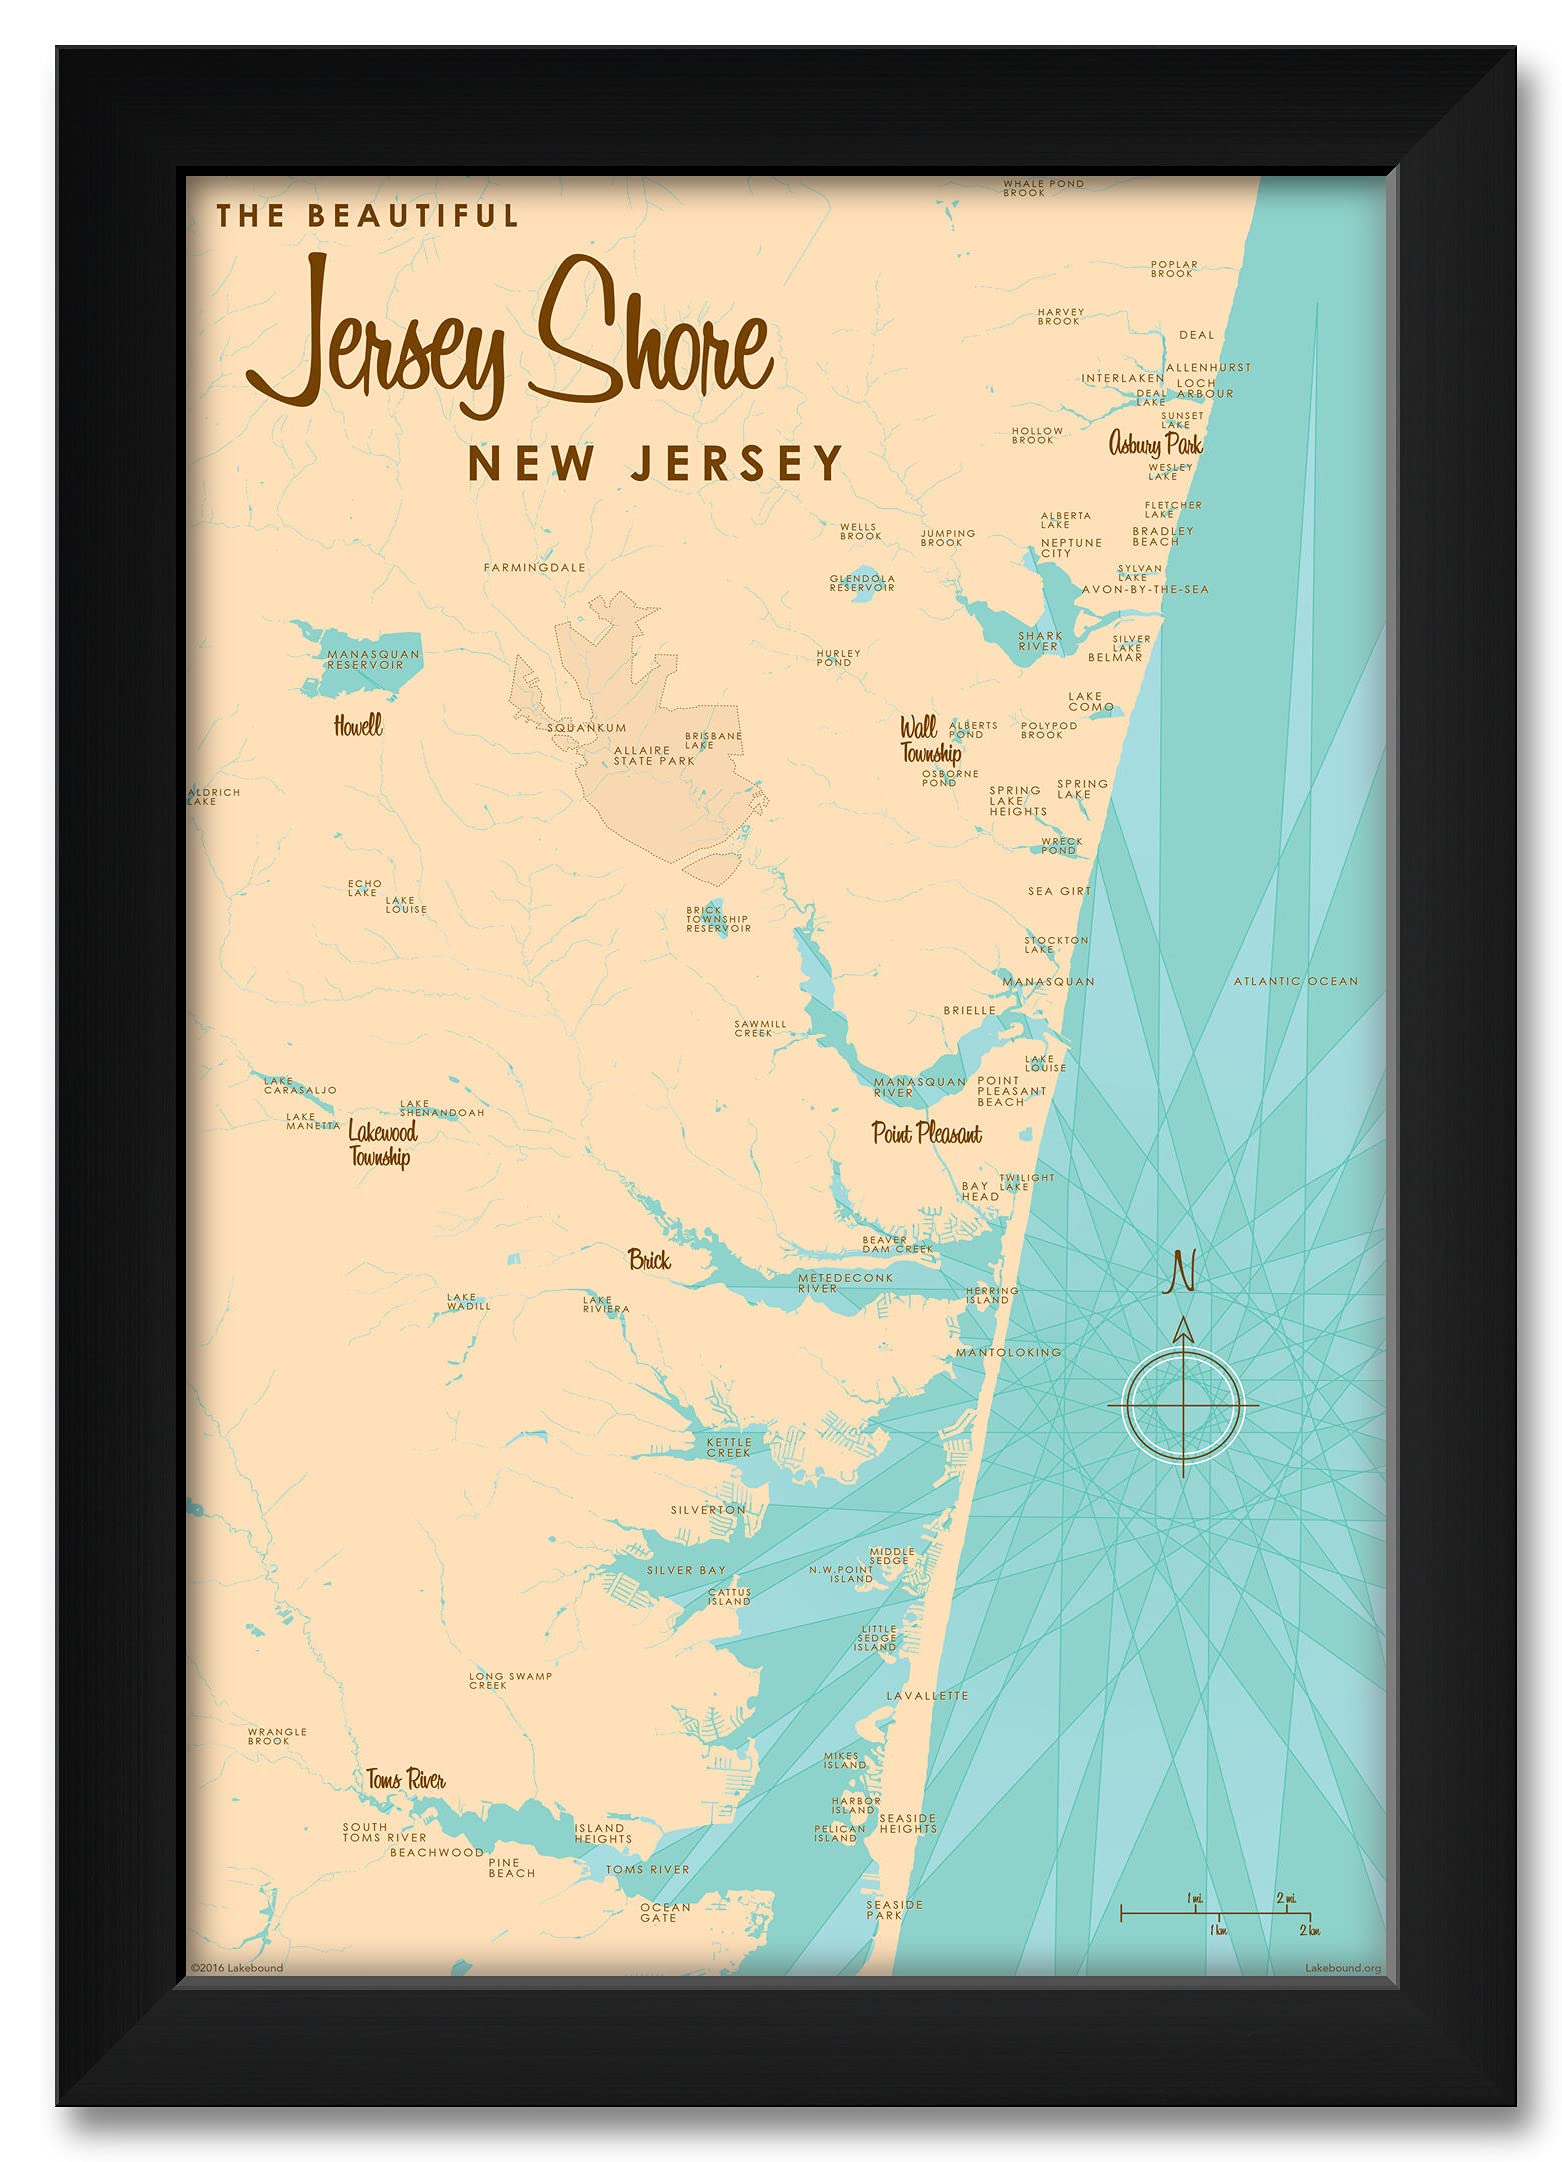 Map highlighting the Jersey Shore in New Jersey, USA